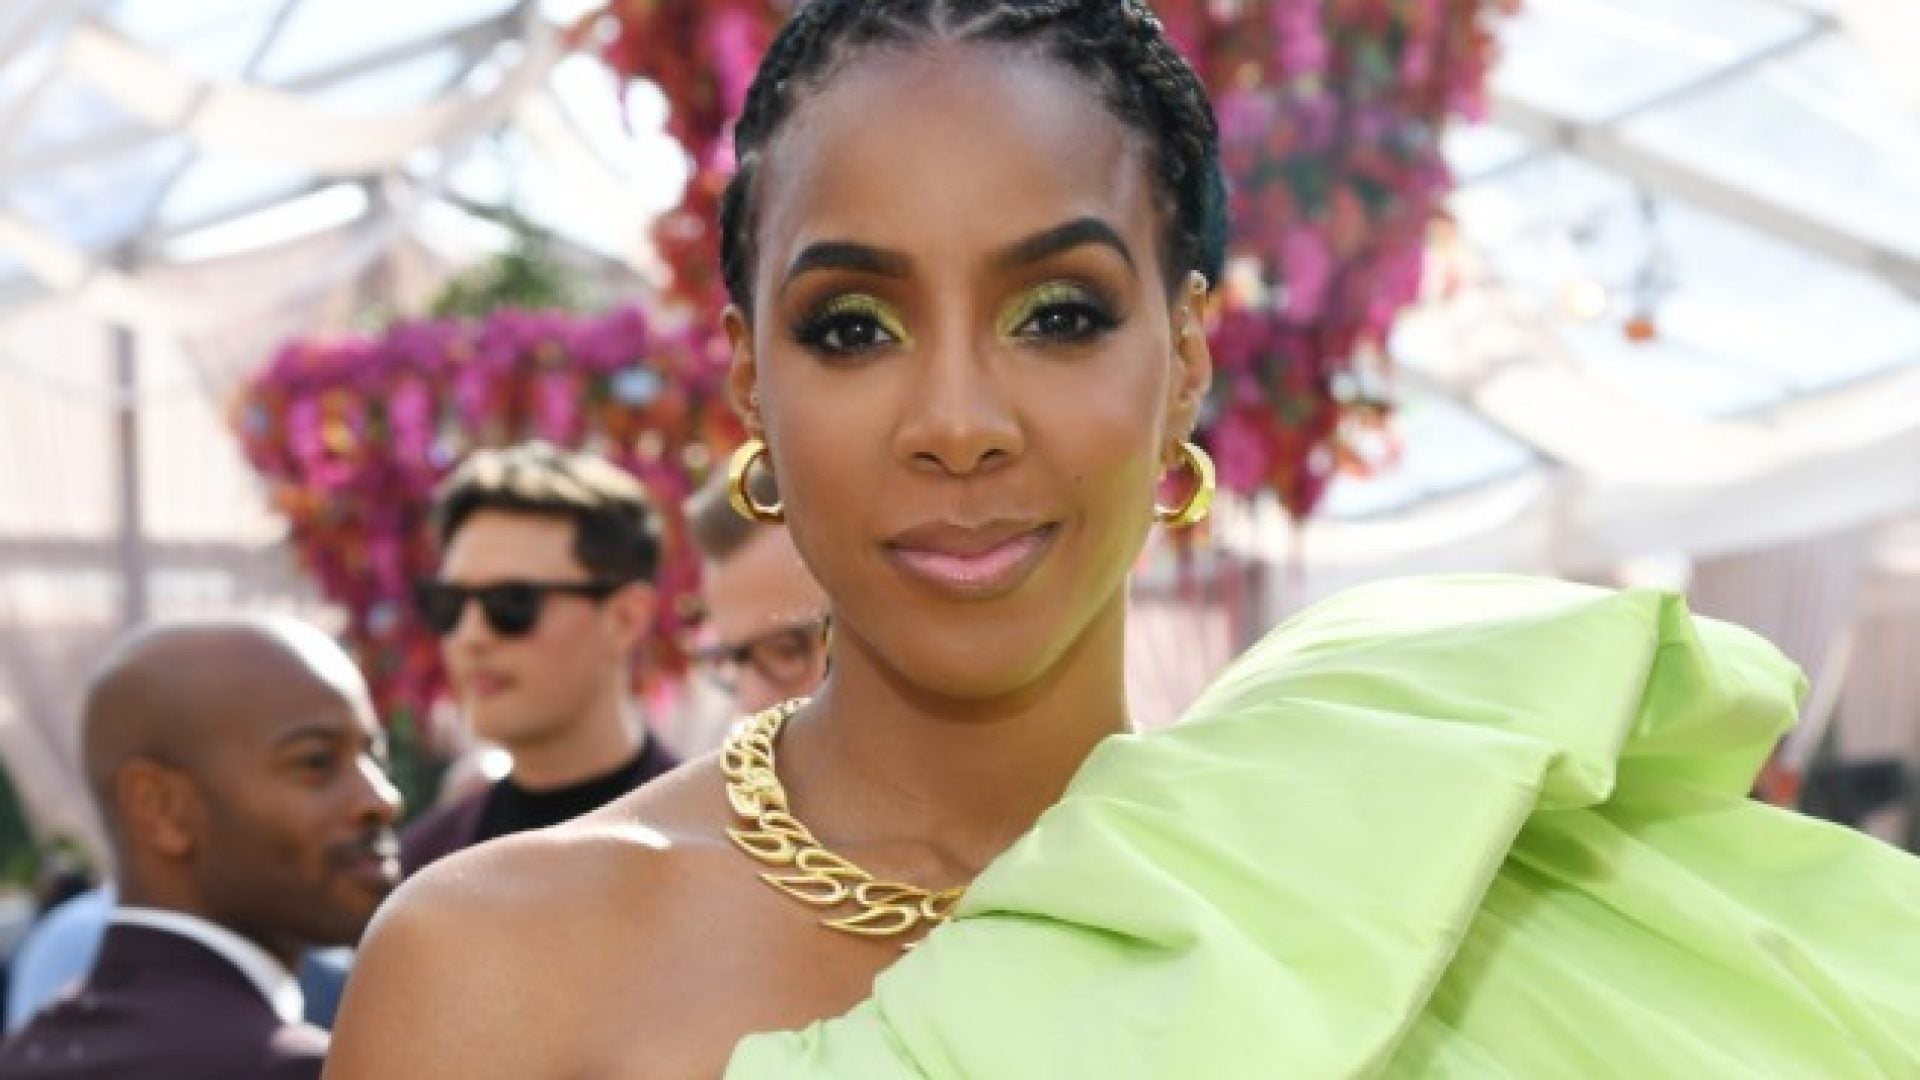 Black Beauties At The Roc Nation Brunch Gave Us Serious Inspiration